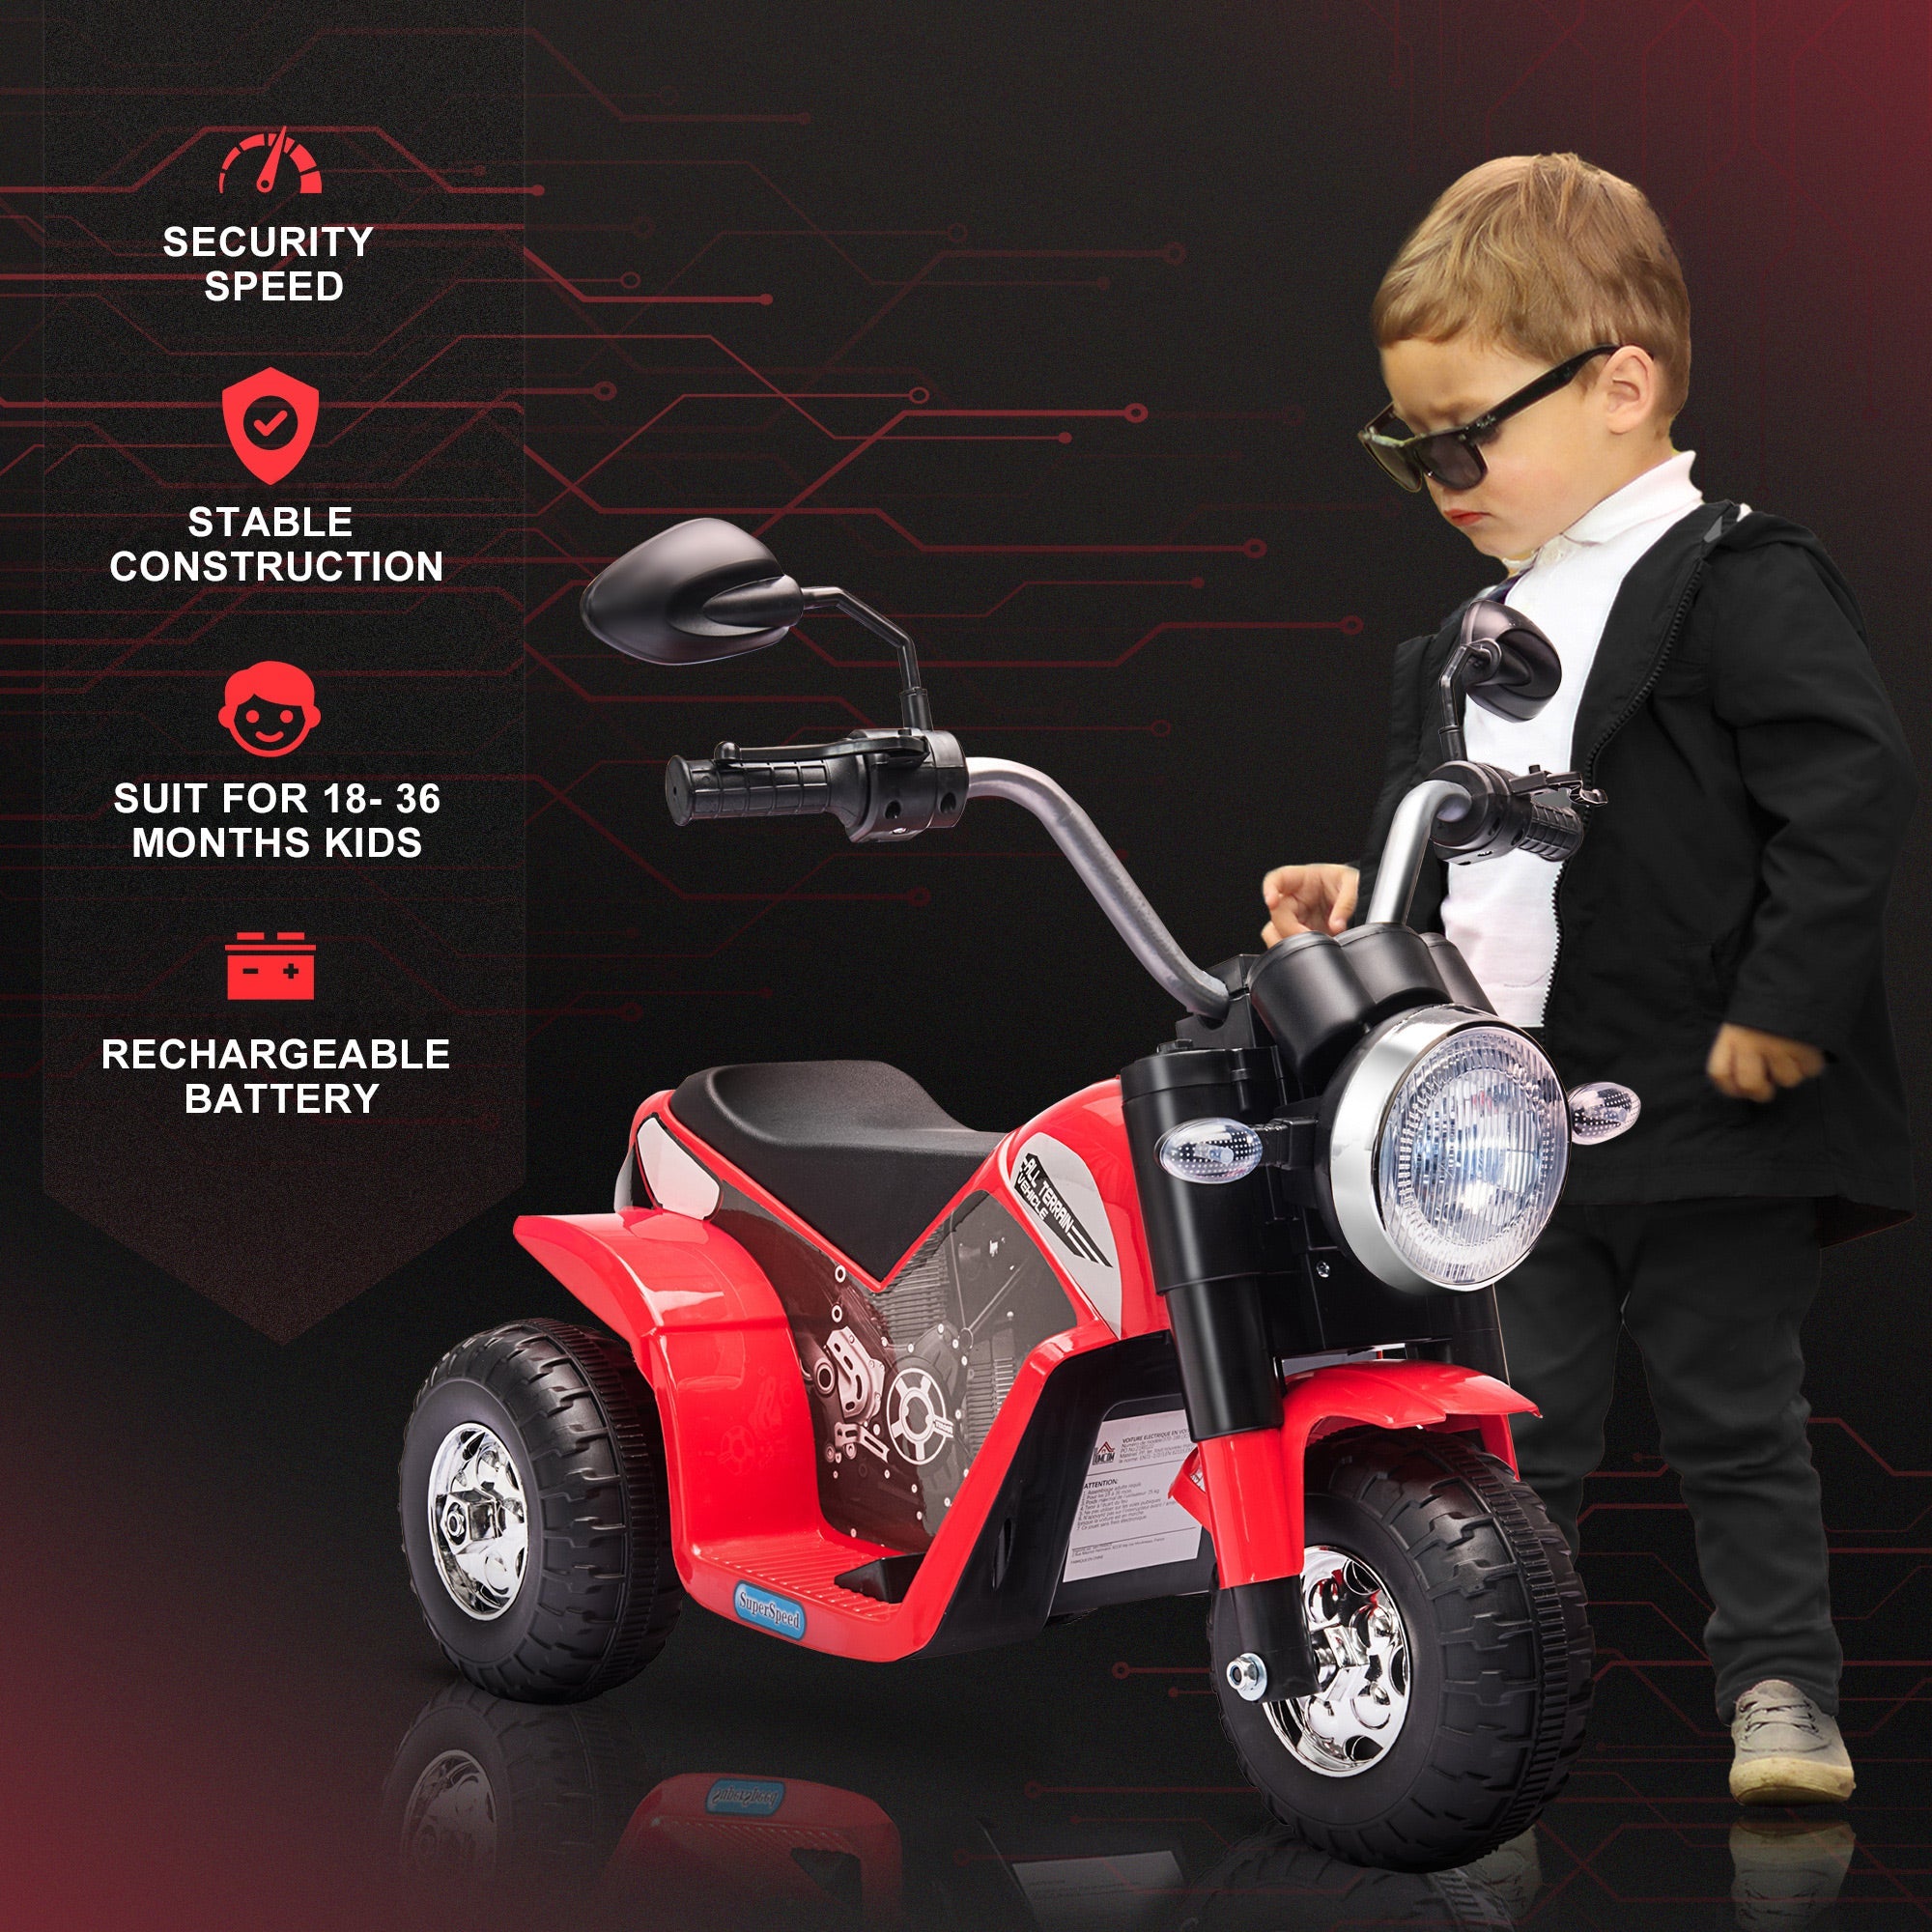 Kids Electric Motorcycle Ride-On Toy 3-Wheels Battery Powered Motorbike Rechargeable 6V with Horn Headlights Motorbike for 18 - 36 Months Red-4